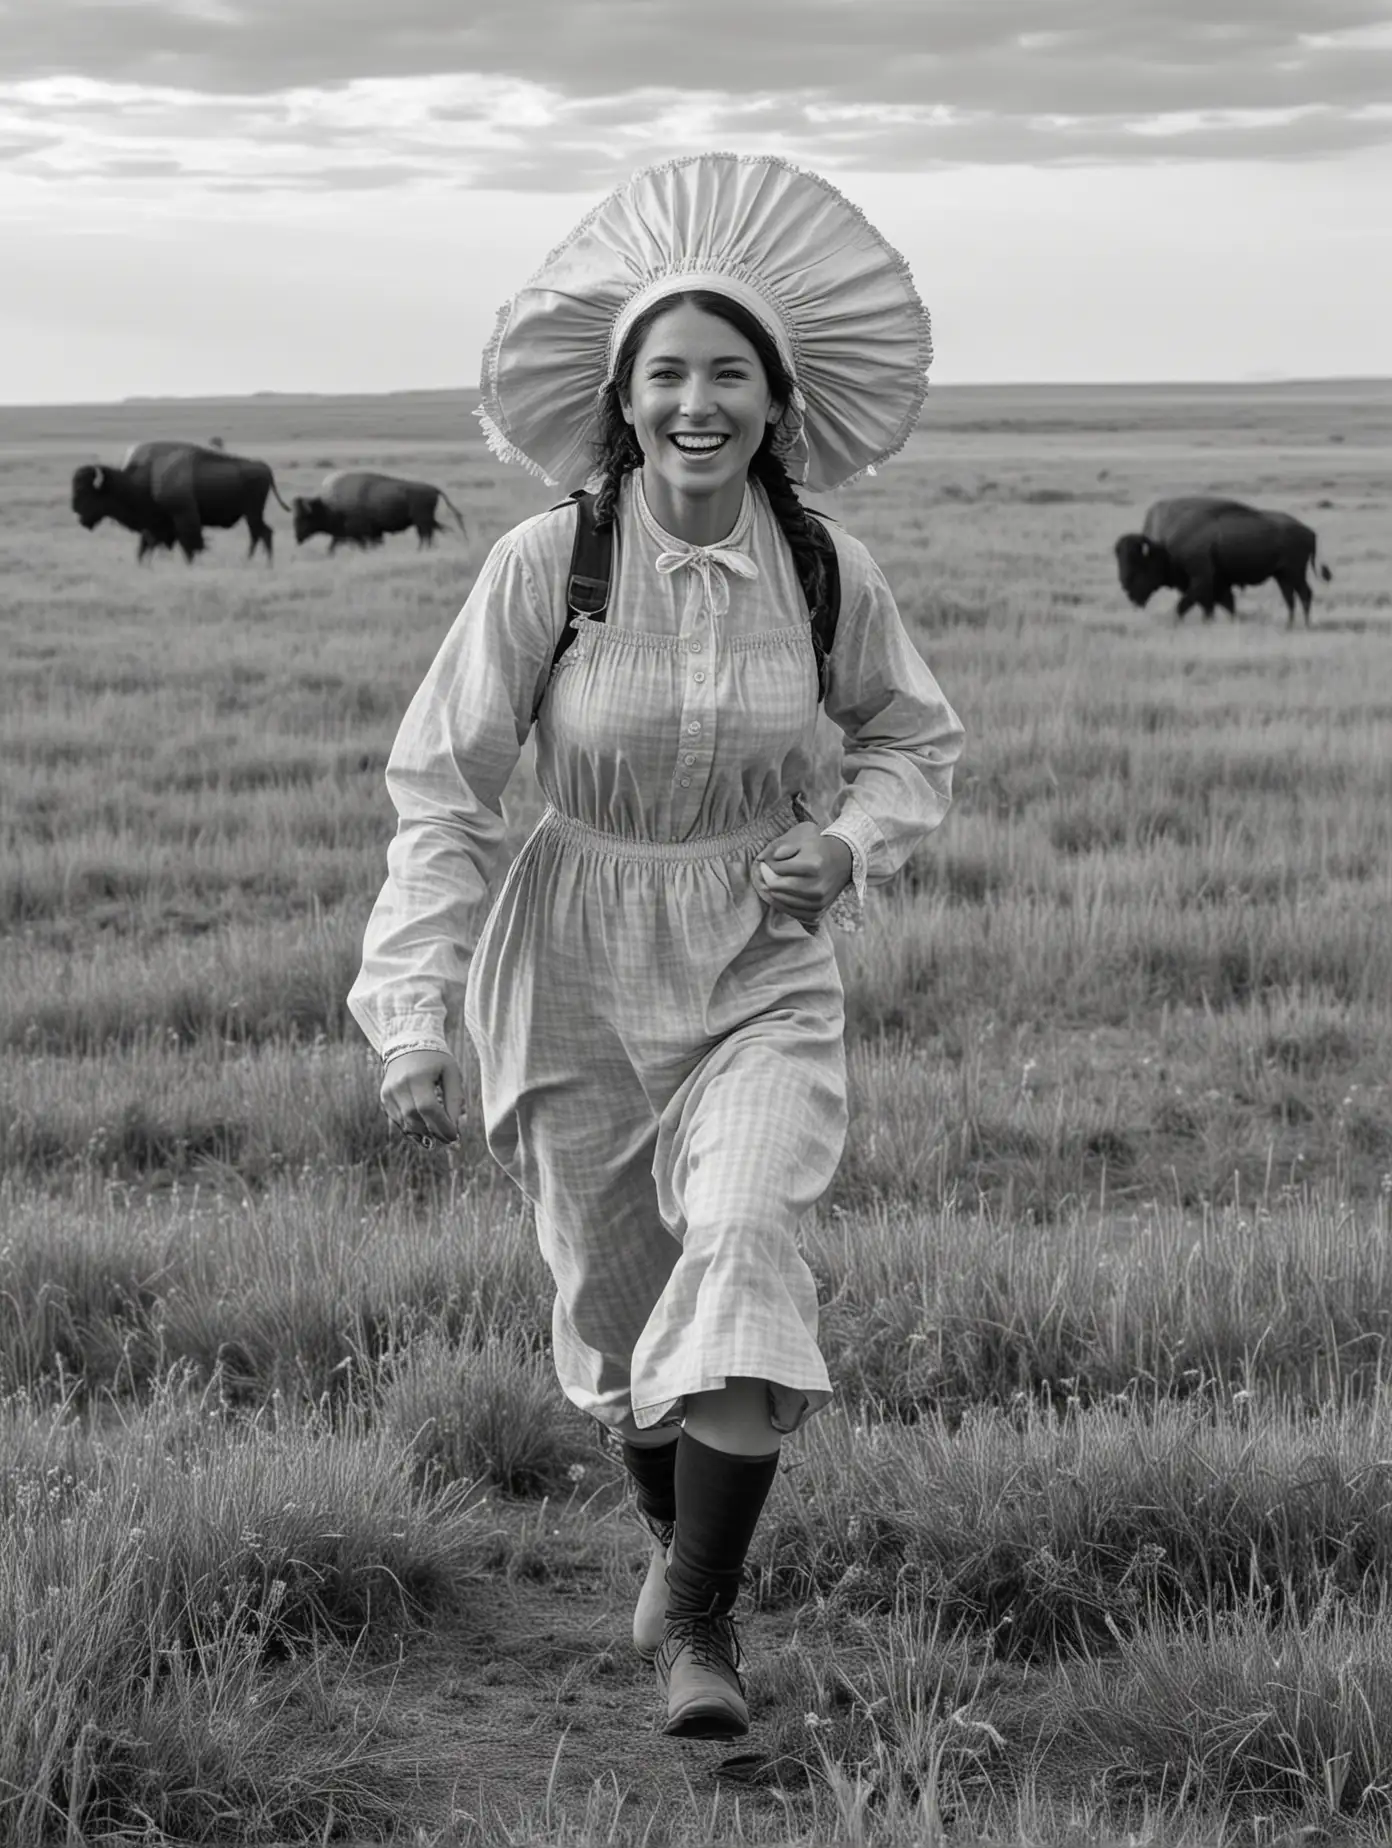 Pioneer Woman Running Through Prairie with Buffalo in Black and White